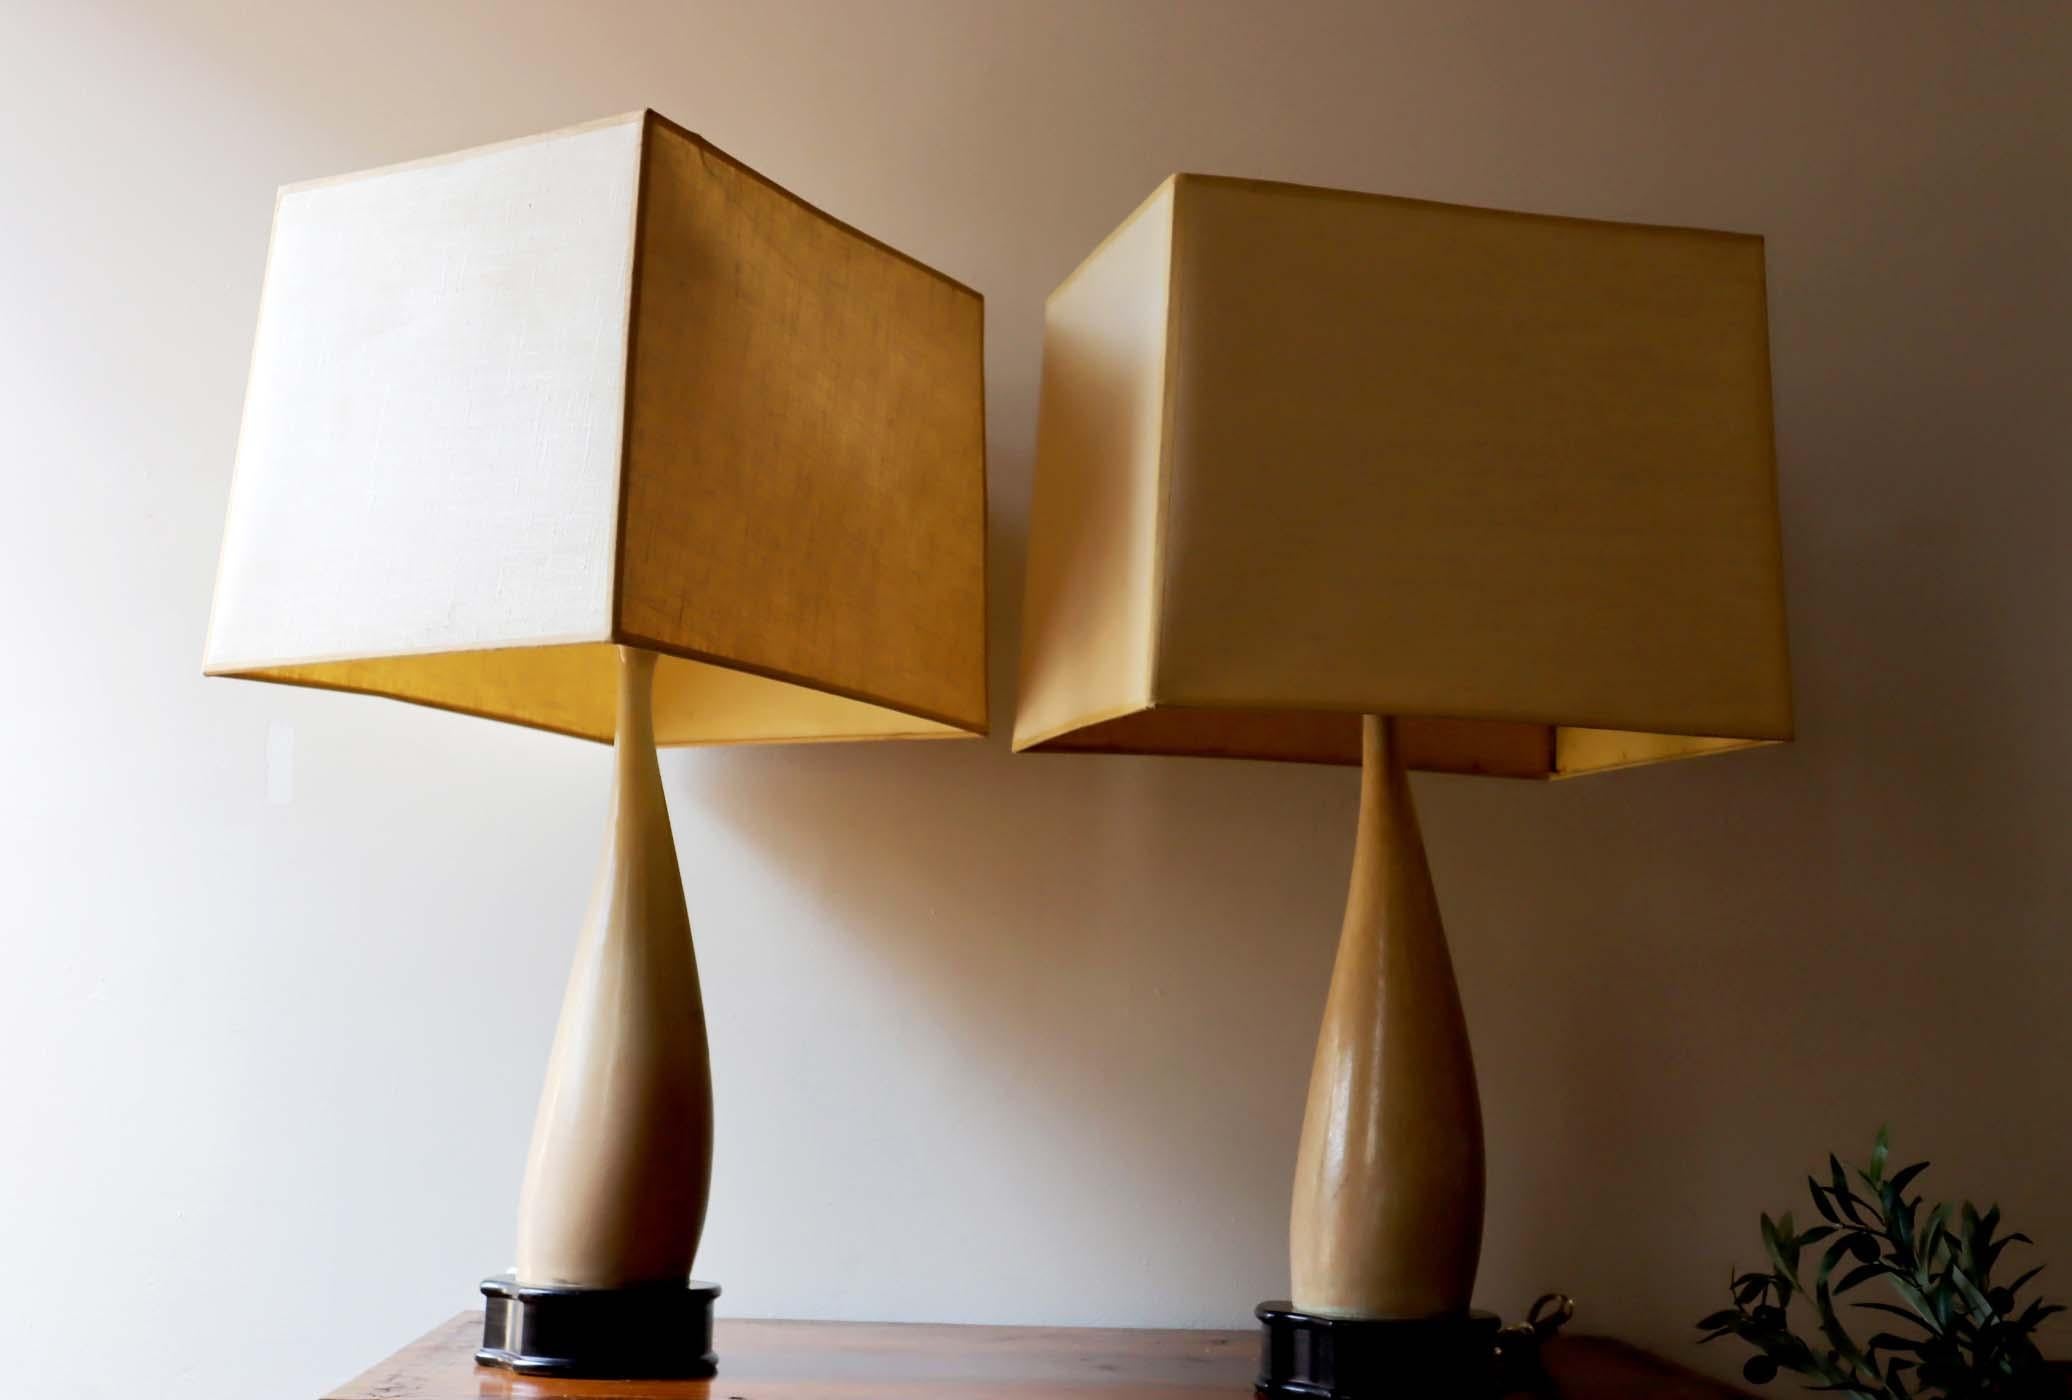 Pair of vintage lamps crafted from bone.
Please note there is wear from age on lamp shades.